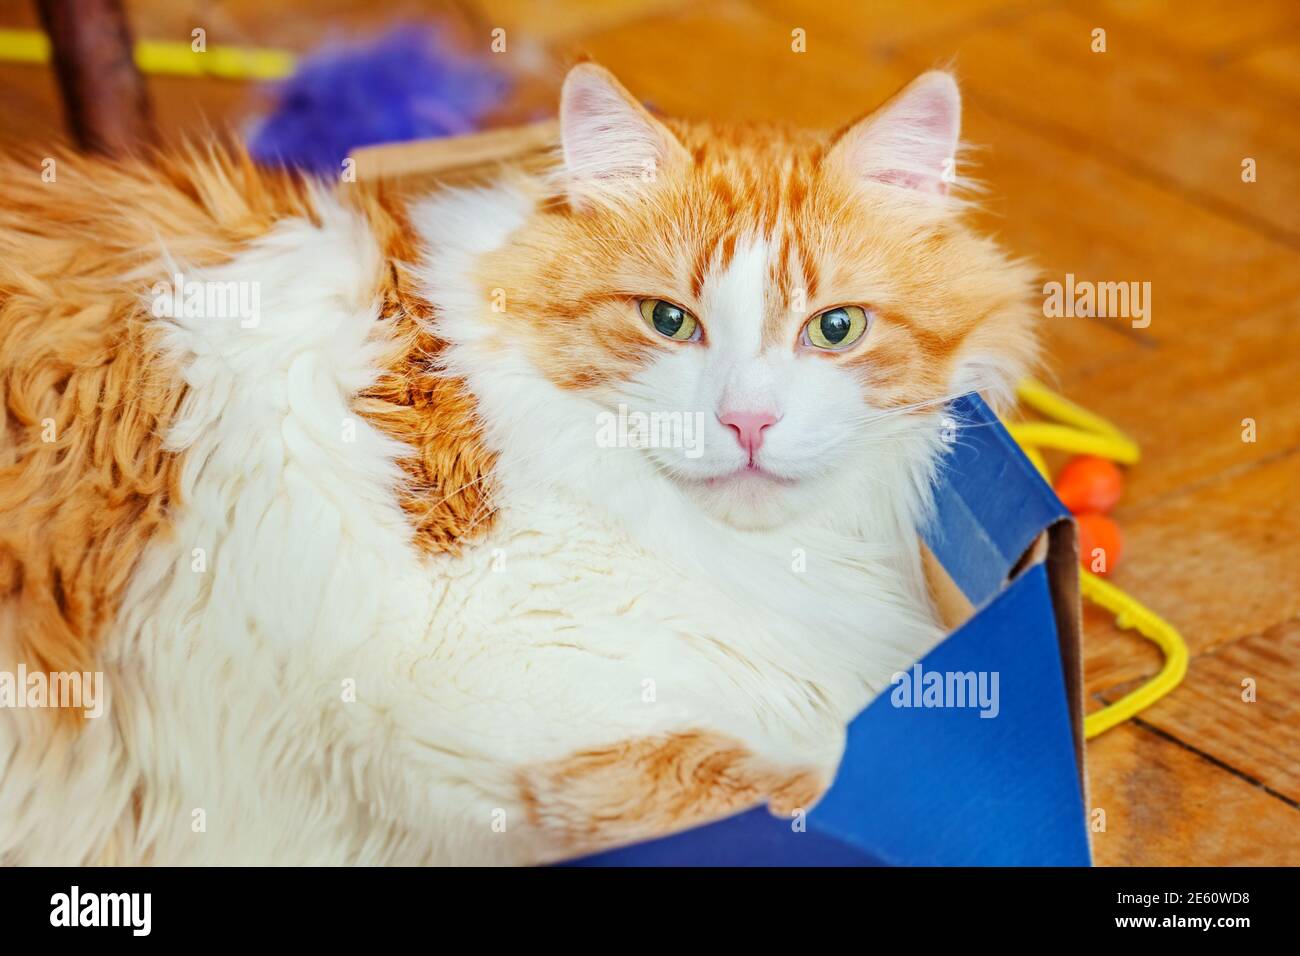 Adult beautiful red charming cat is lying in blue box Stock Photo